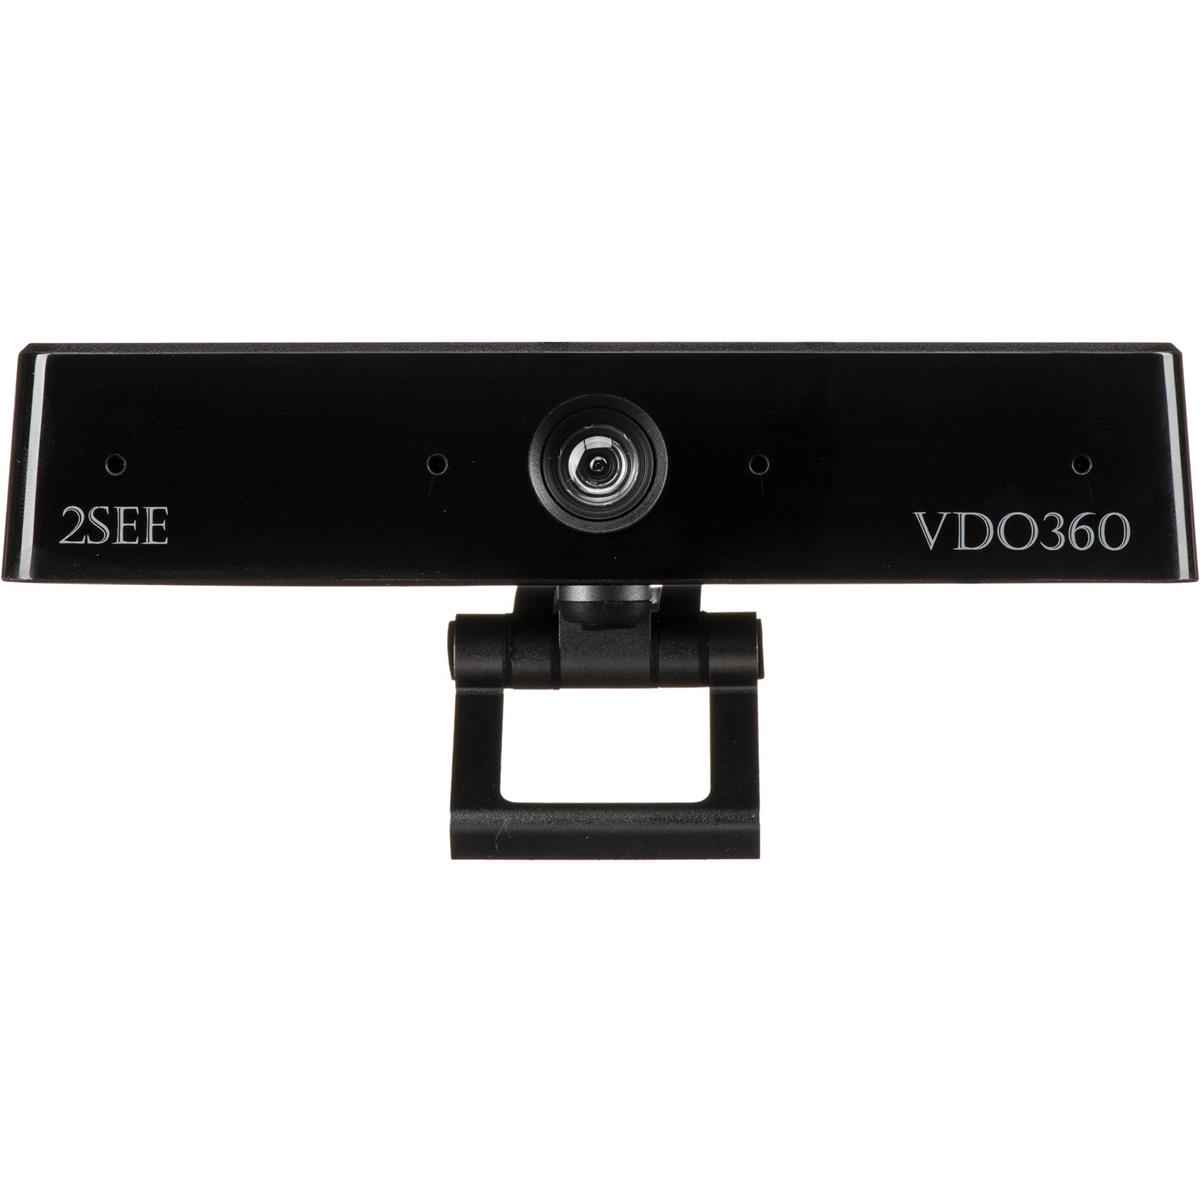 Image of Matrox VDO360 2SEE Full HD USB Video Conference Camera